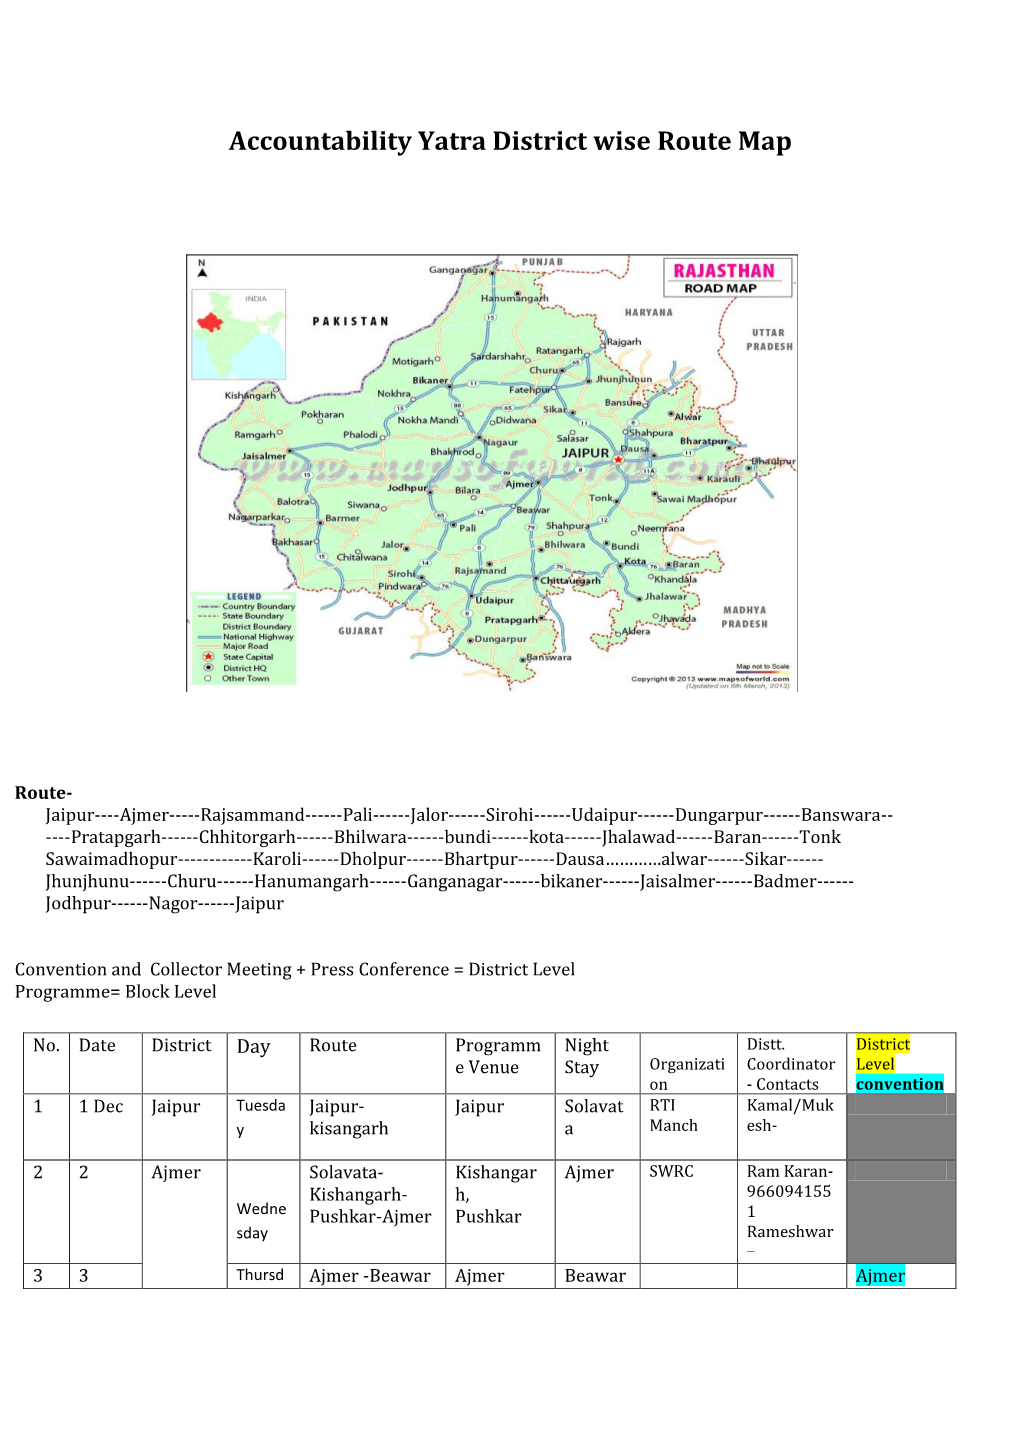 Accountability Yatra District Wise Route Map